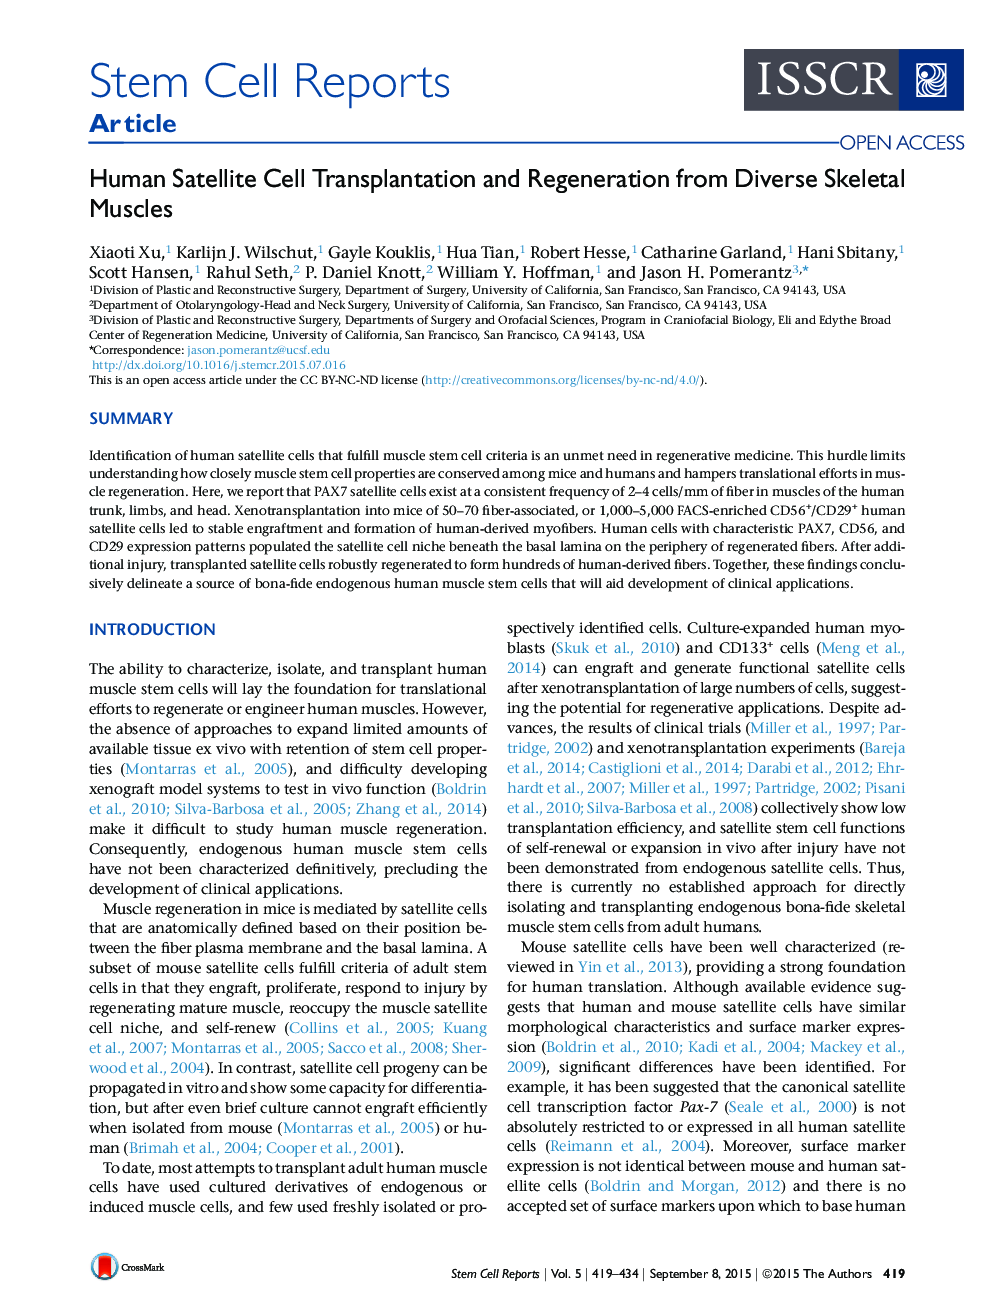 Human Satellite Cell Transplantation and Regeneration from Diverse Skeletal Muscles 